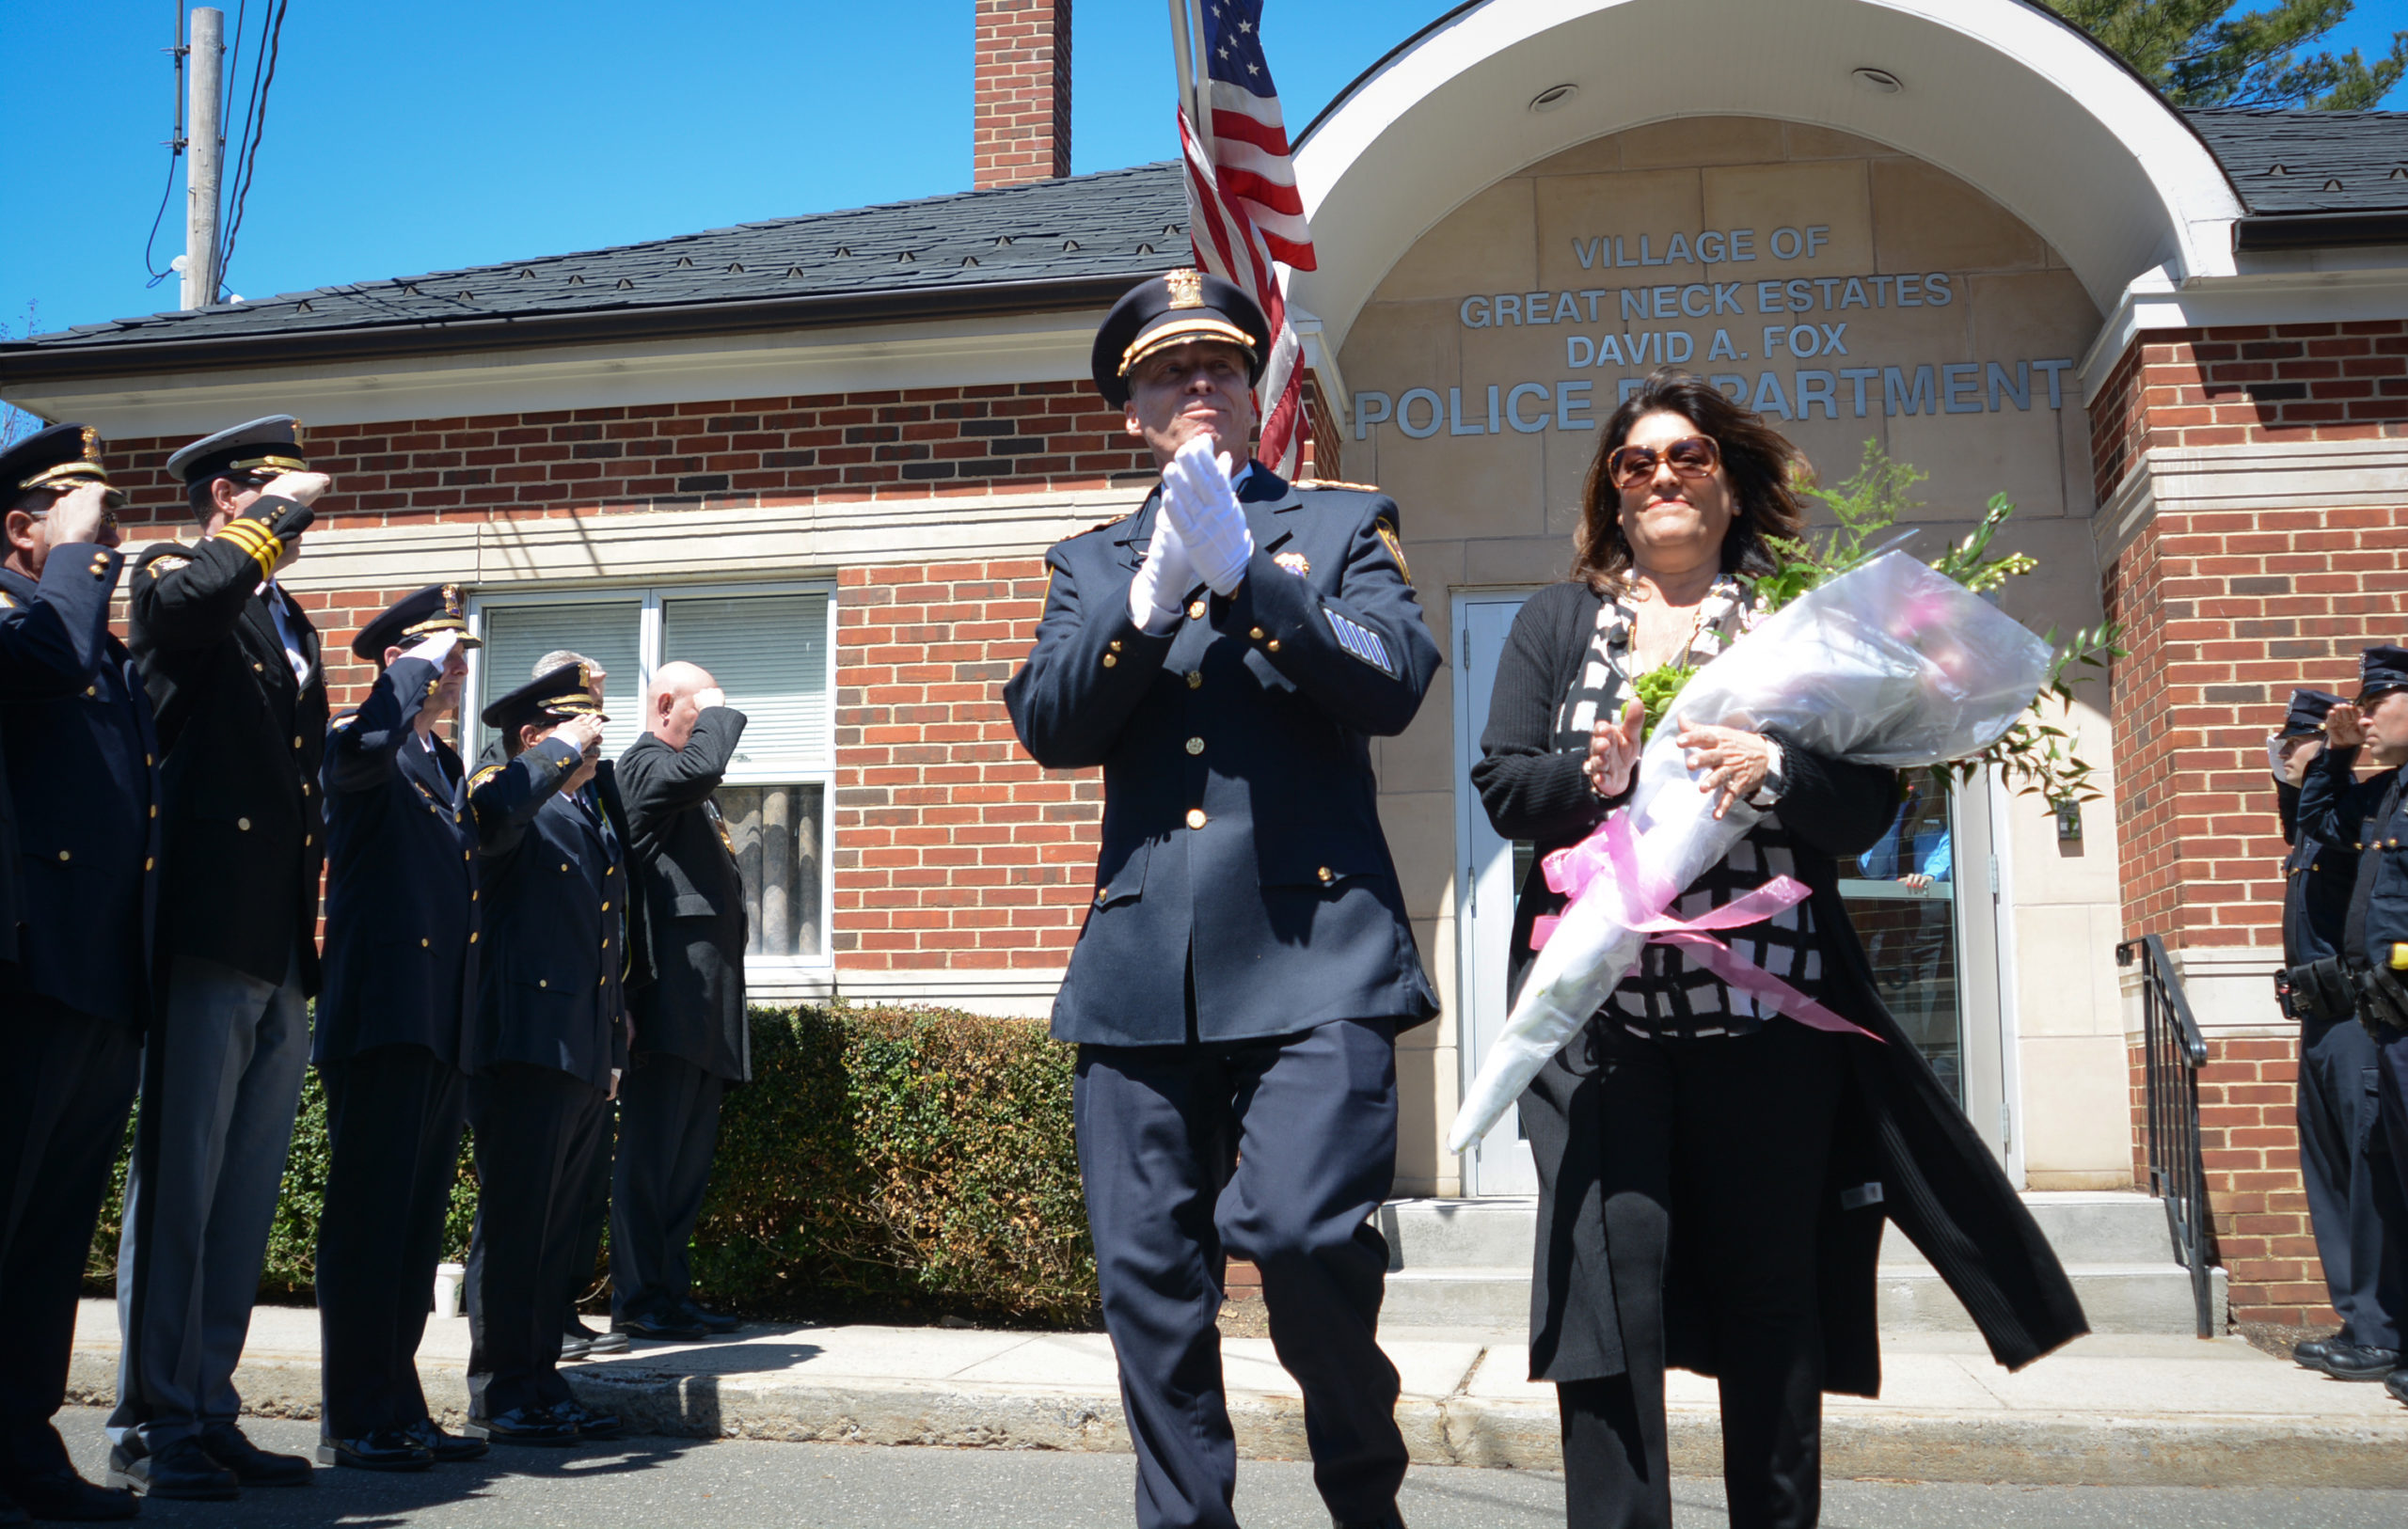 Outgoing Great Neck Estates Police Chief John Garbedian steps out from the David A. Fox police department building on Cedar Drive, greeted by family and officers from all around Nassau County. Ricardo Moreno is succeeding him as police chief. (Photo by Janelle Clausen)